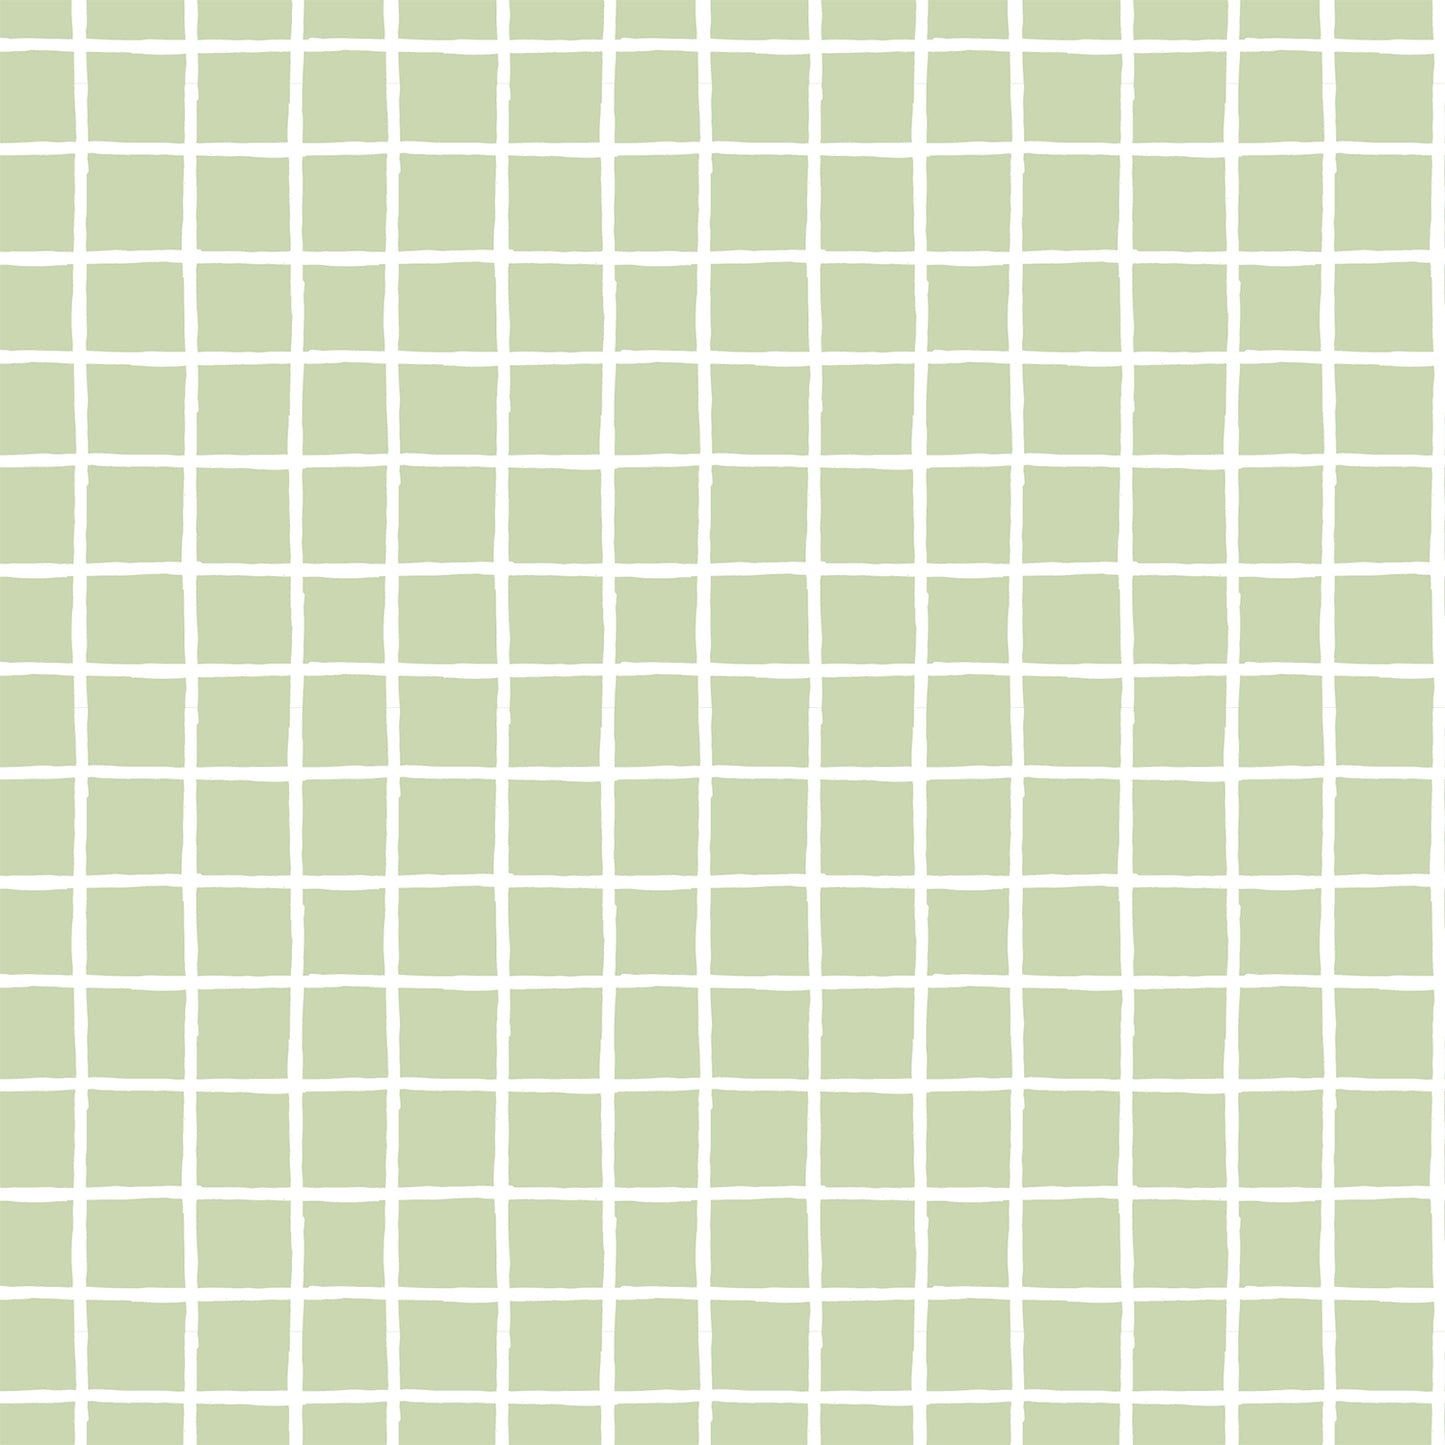 Light Green Small Plaid Flat Wrapping Paper Sheet Wholesale Wraphaholic